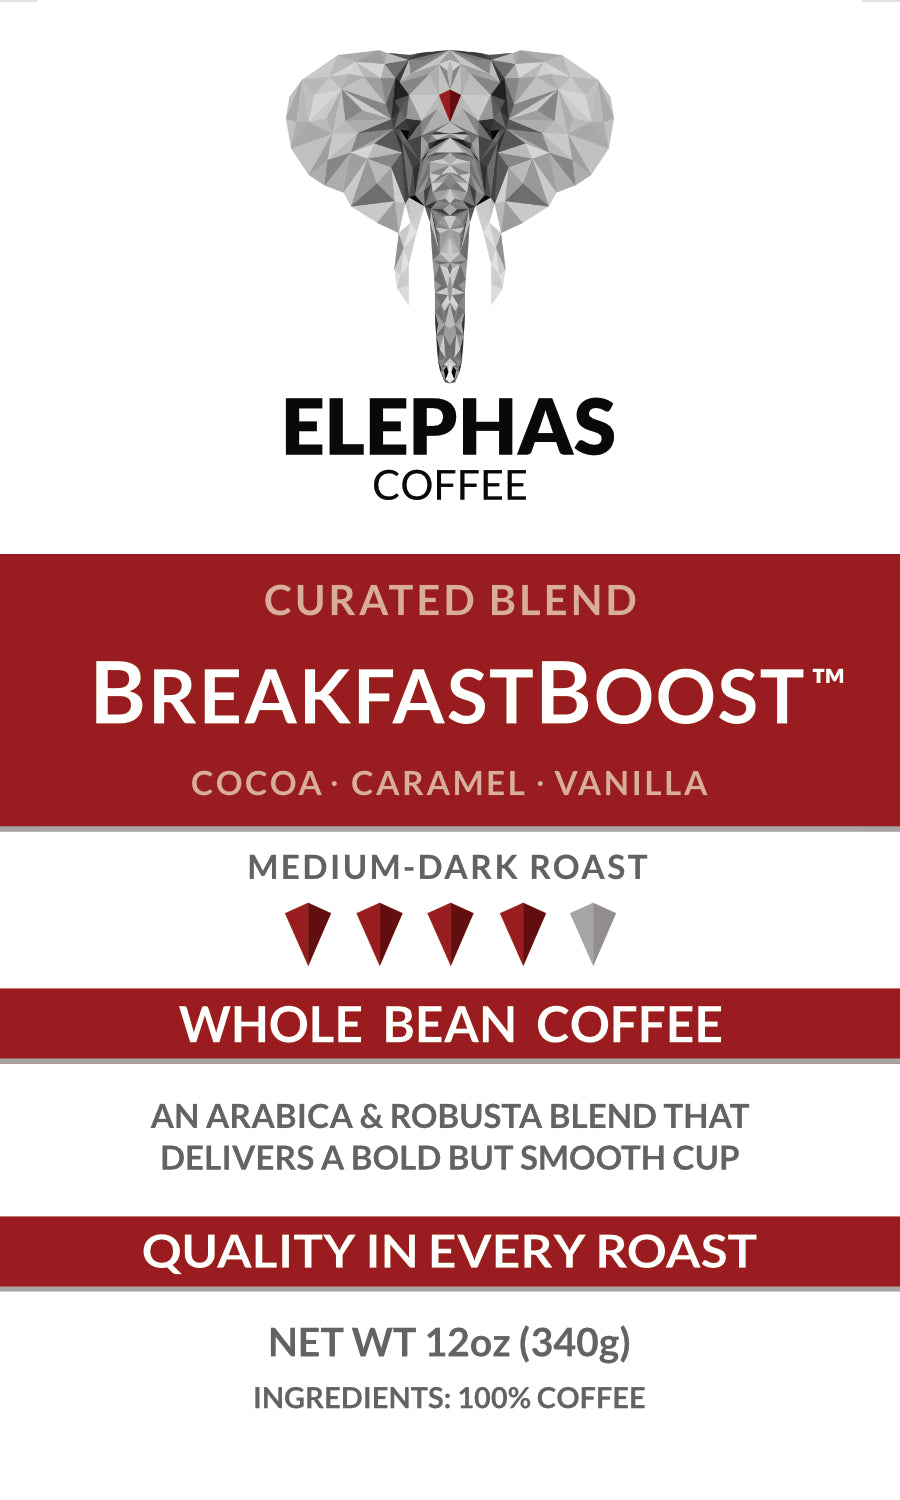 BreakfastBoost - Curated Coffee Blend from Elephas Coffee